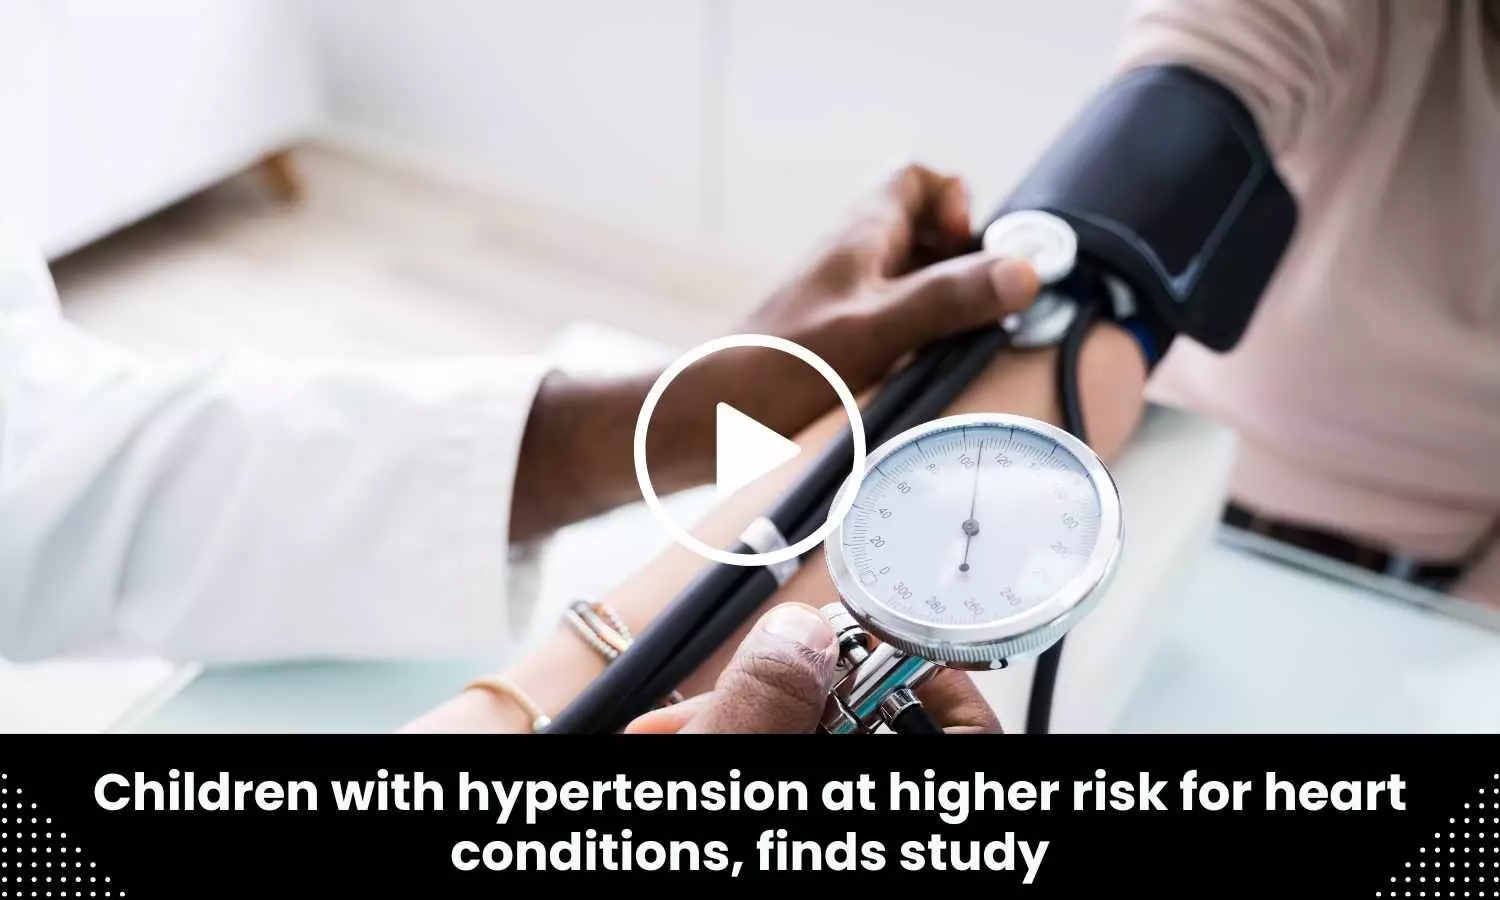 Children with hypertension at higher risk for heart conditions, study finds